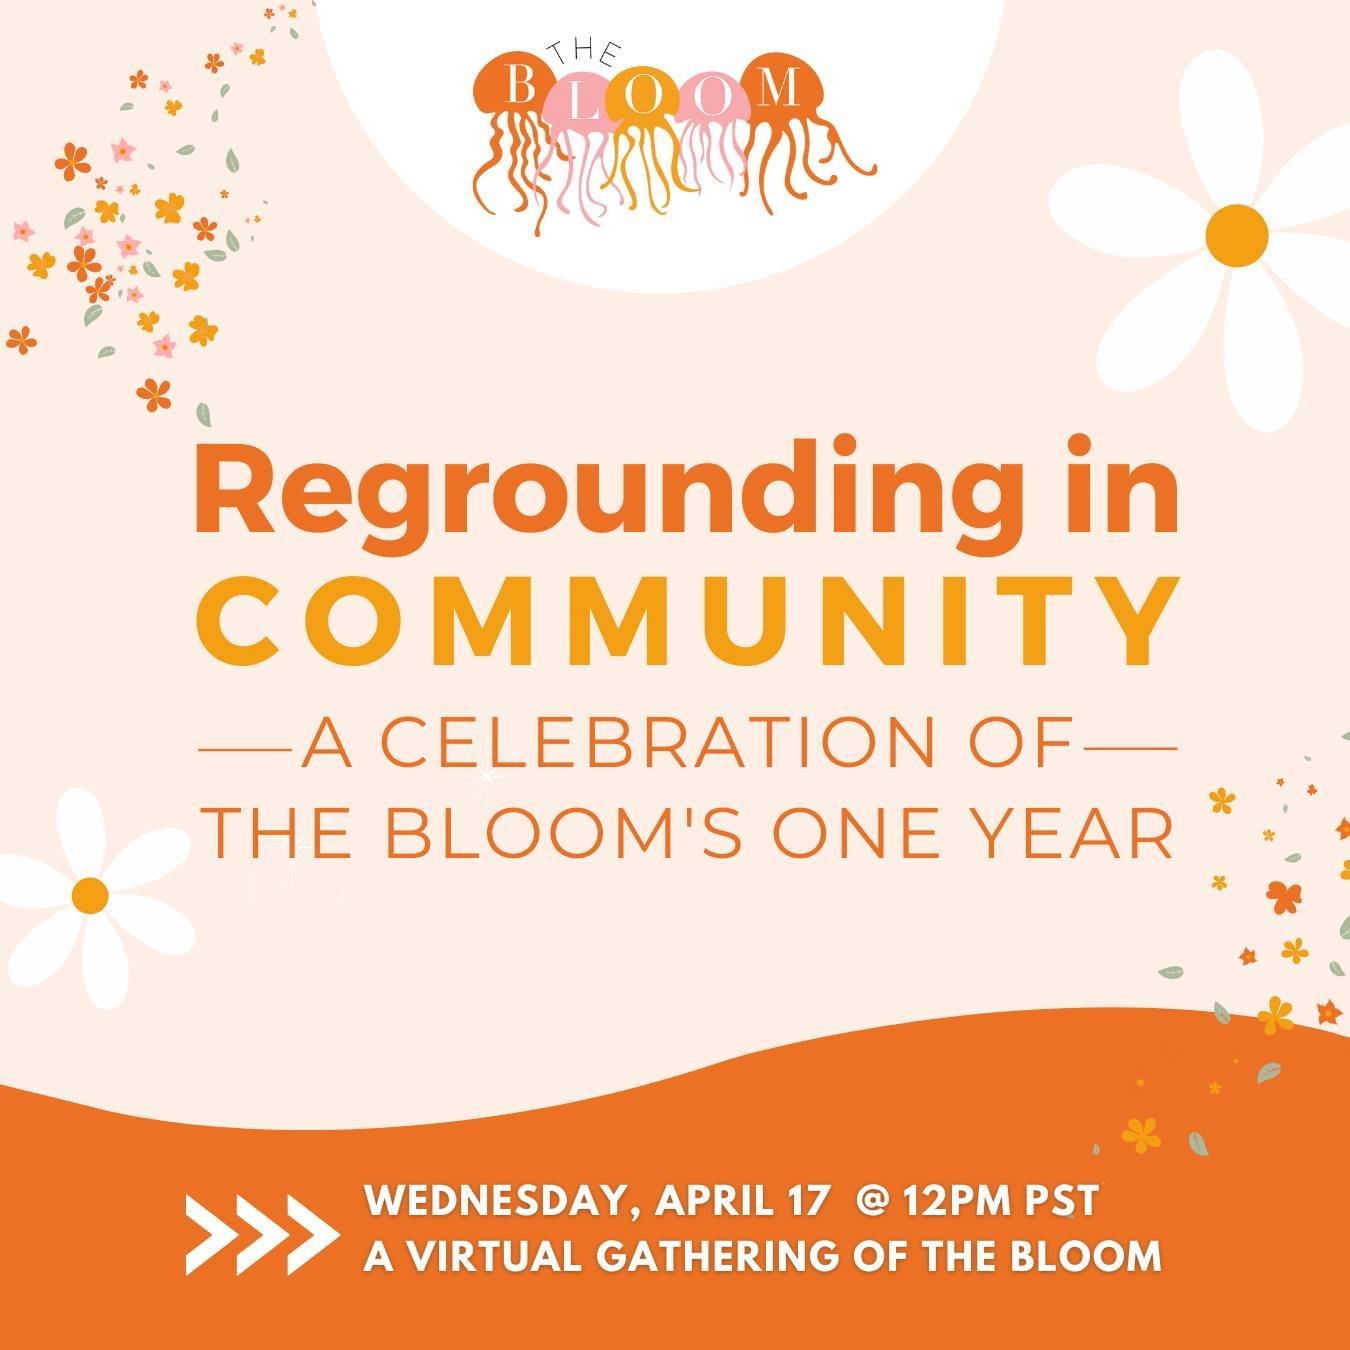 🌸 Join us in celebrating THE BLOOM&rsquo;s one-year anniversary! 🌸⁠
⁠
🥂 We&rsquo;ll be toasting to all of our amazing members, freshening up our community agreements, and hearing from YOU on how we can make our gatherings and support circle even s